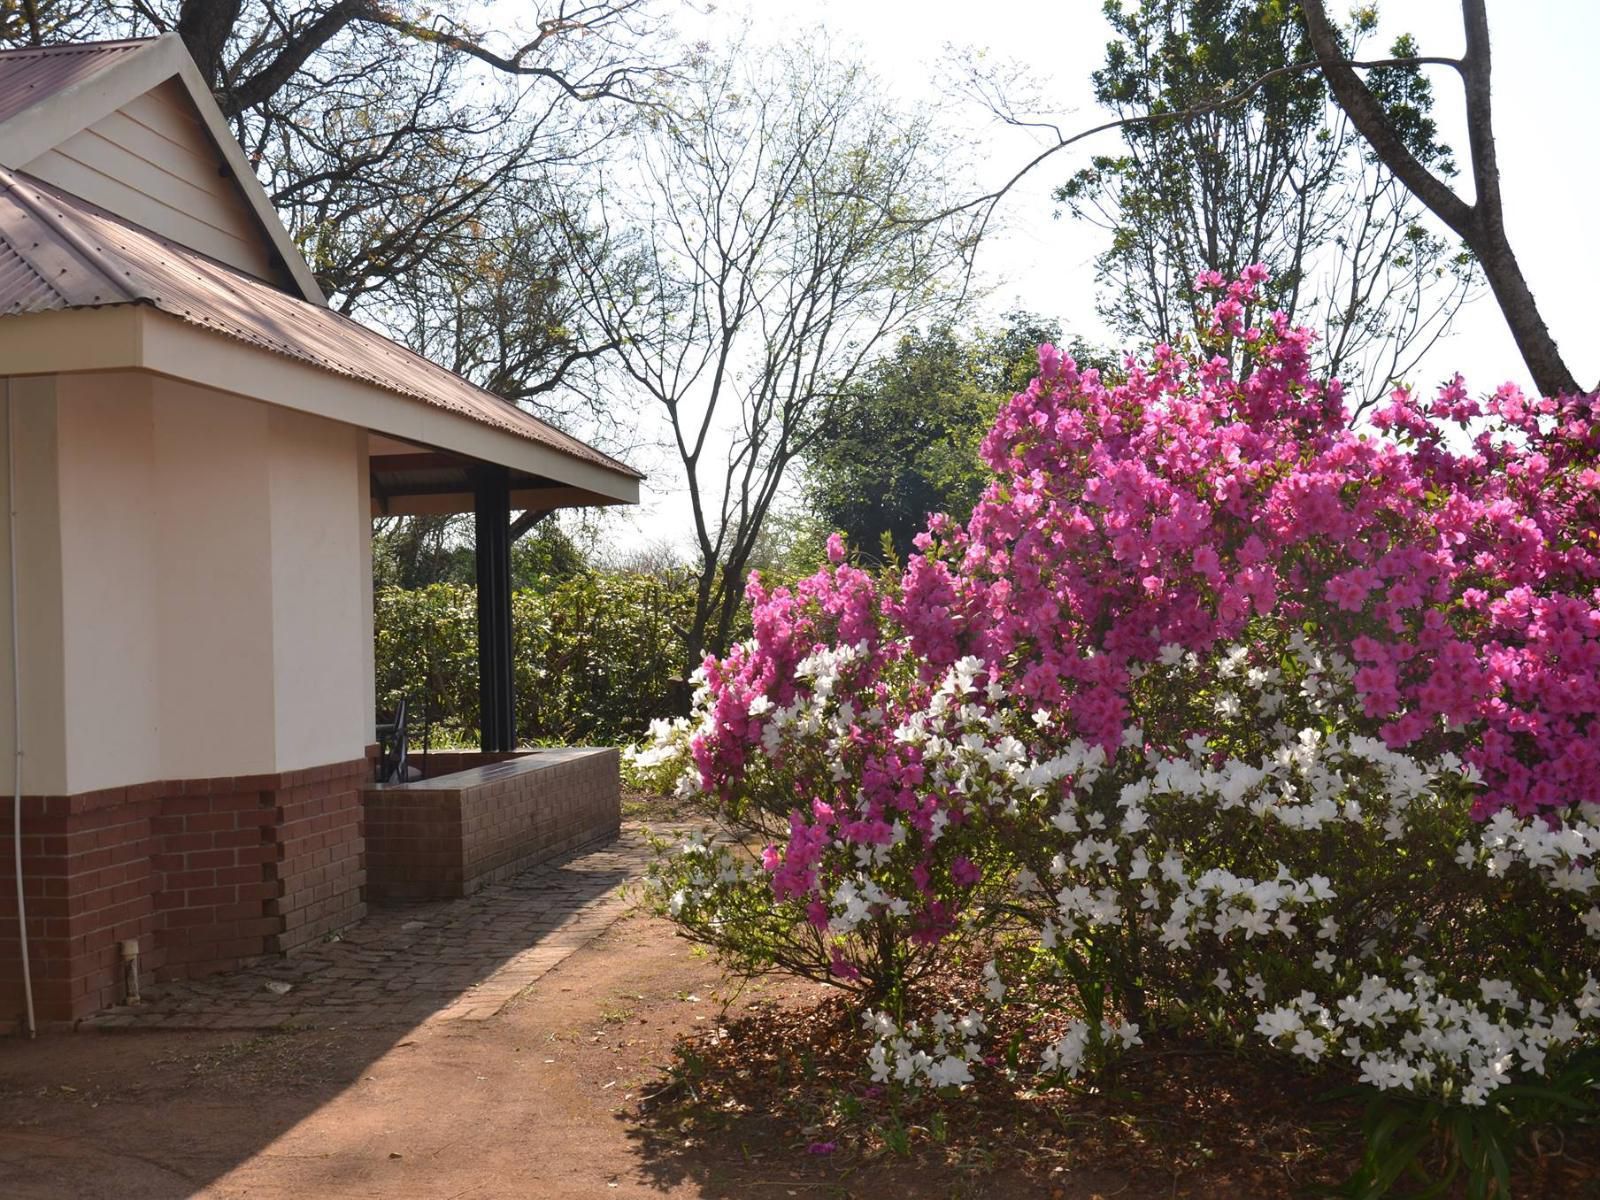 Heuglins Lodge White River Mpumalanga South Africa Blossom, Plant, Nature, House, Building, Architecture, Rose, Flower, Garden